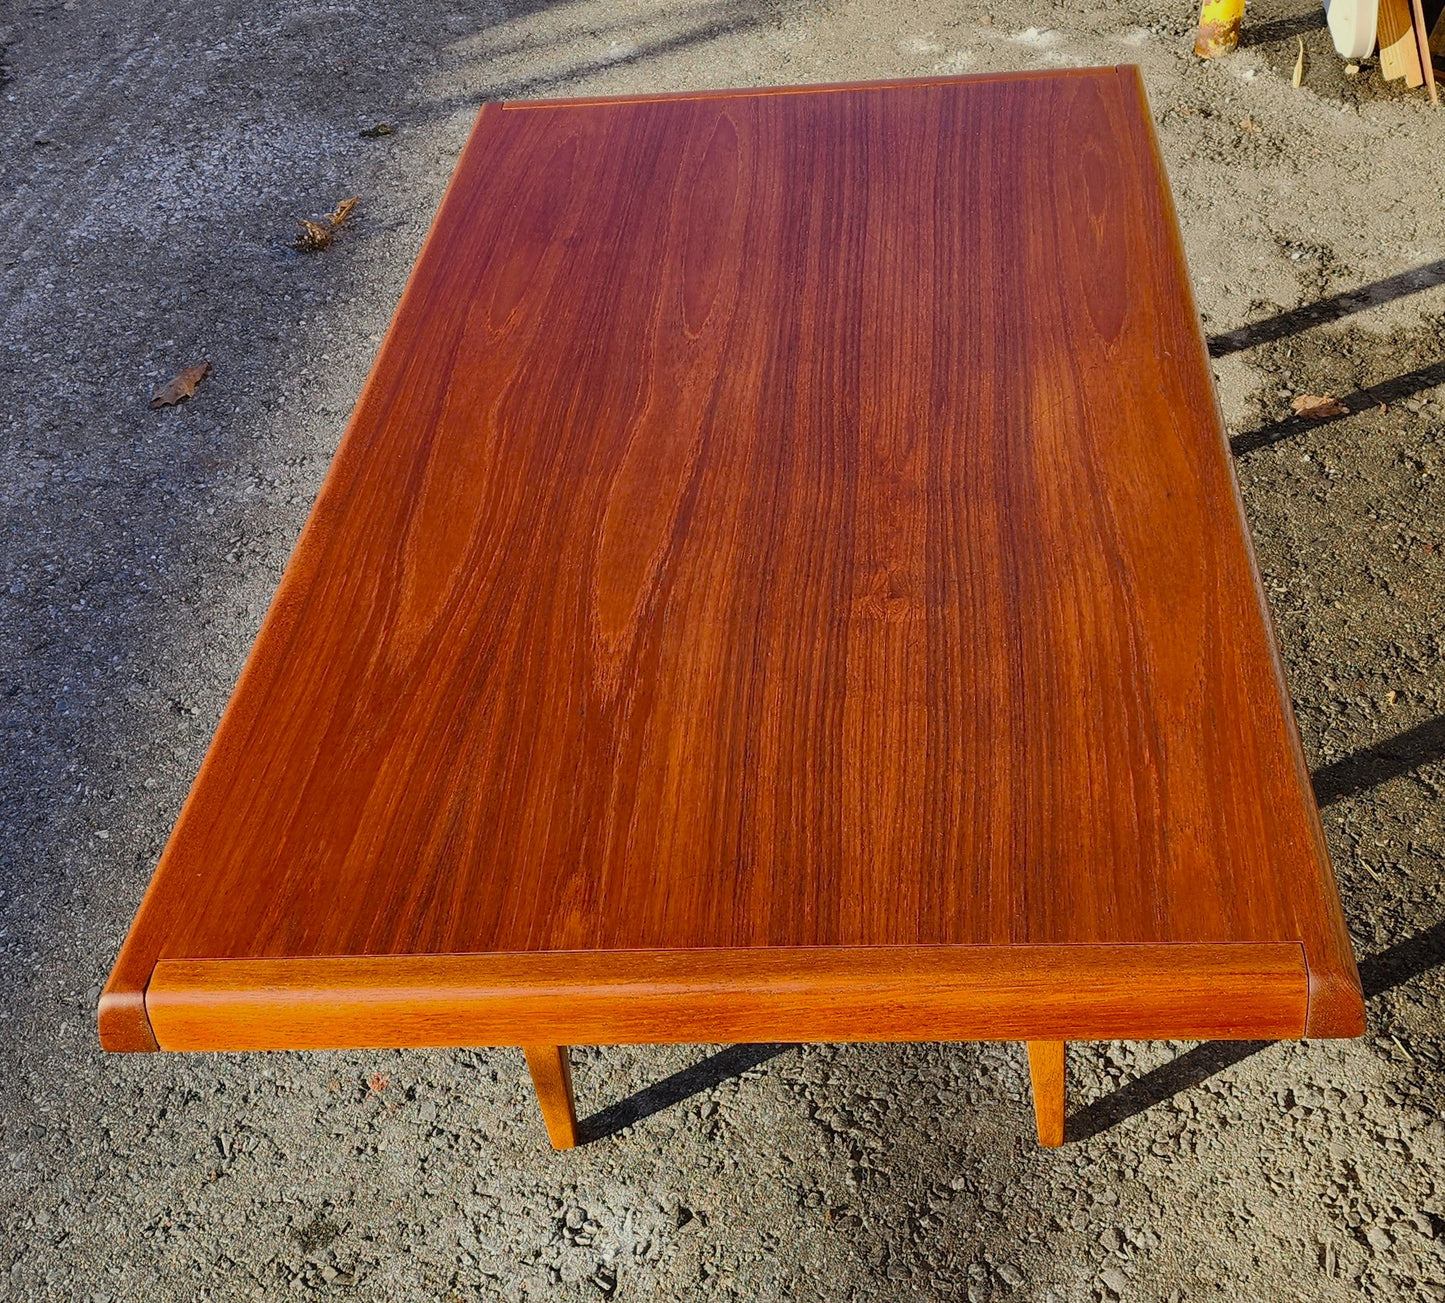 REFINISHED Danish Mid Century Modern Teak Coffee Table w Extensions